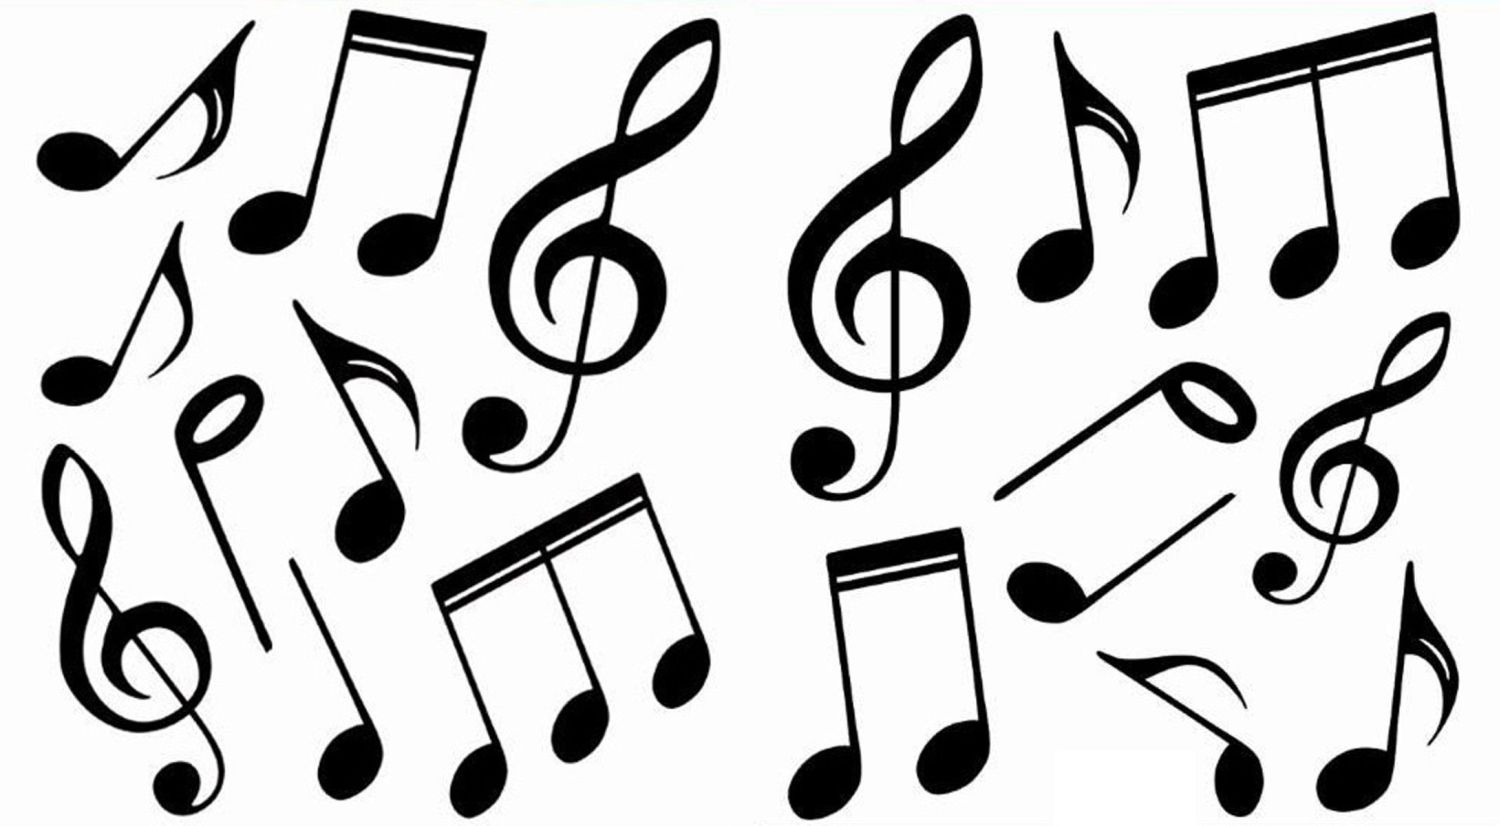 Music Notes Symbols For Facebook | Clipart library - Free Clipart Images